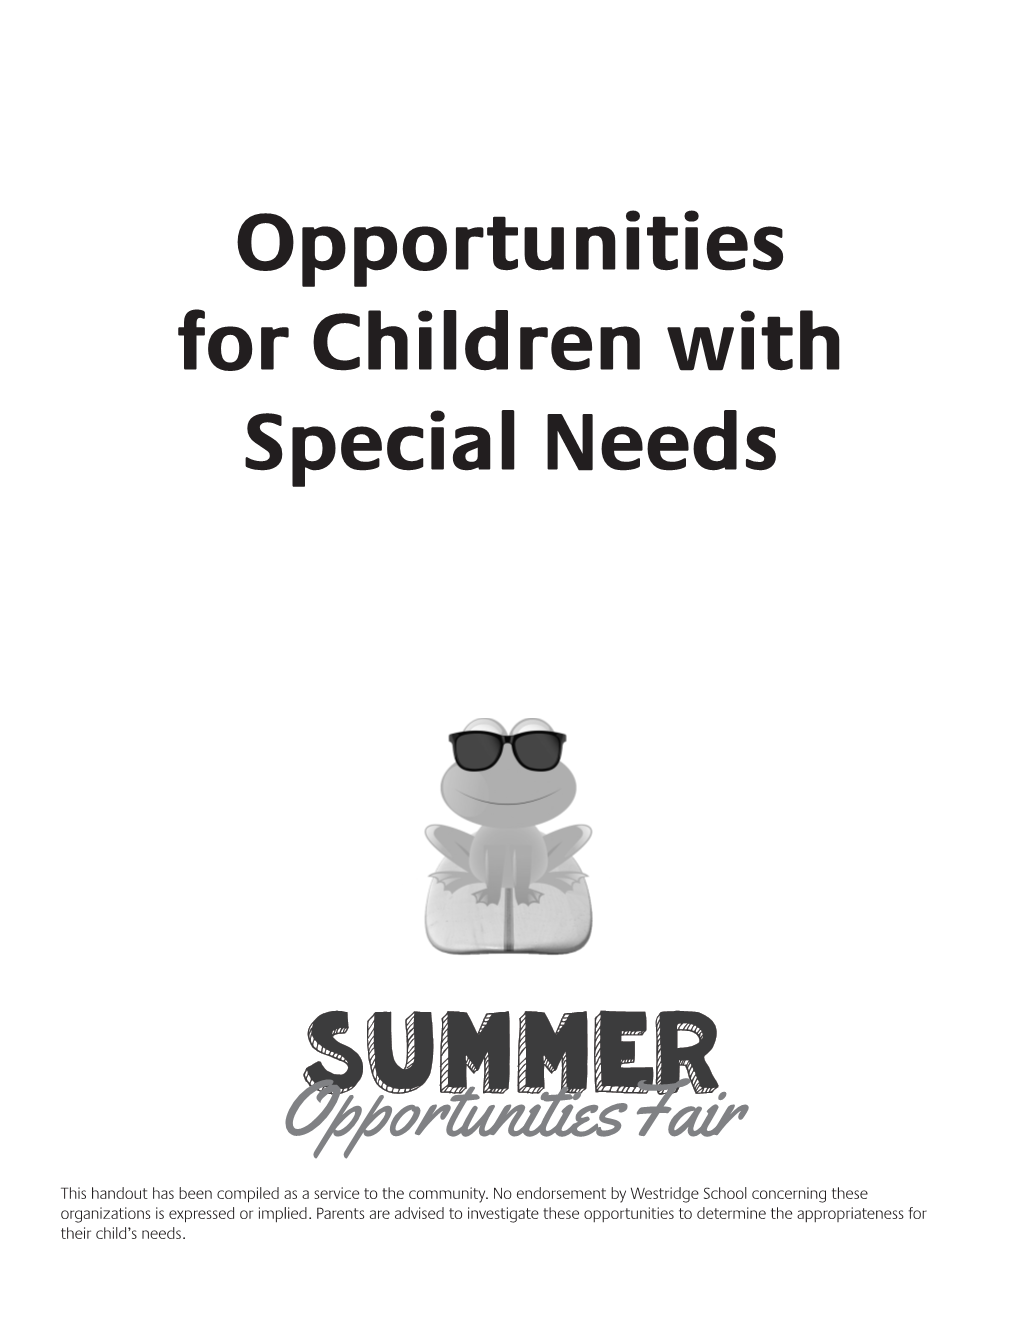 Opportunities for Children with Special Needs